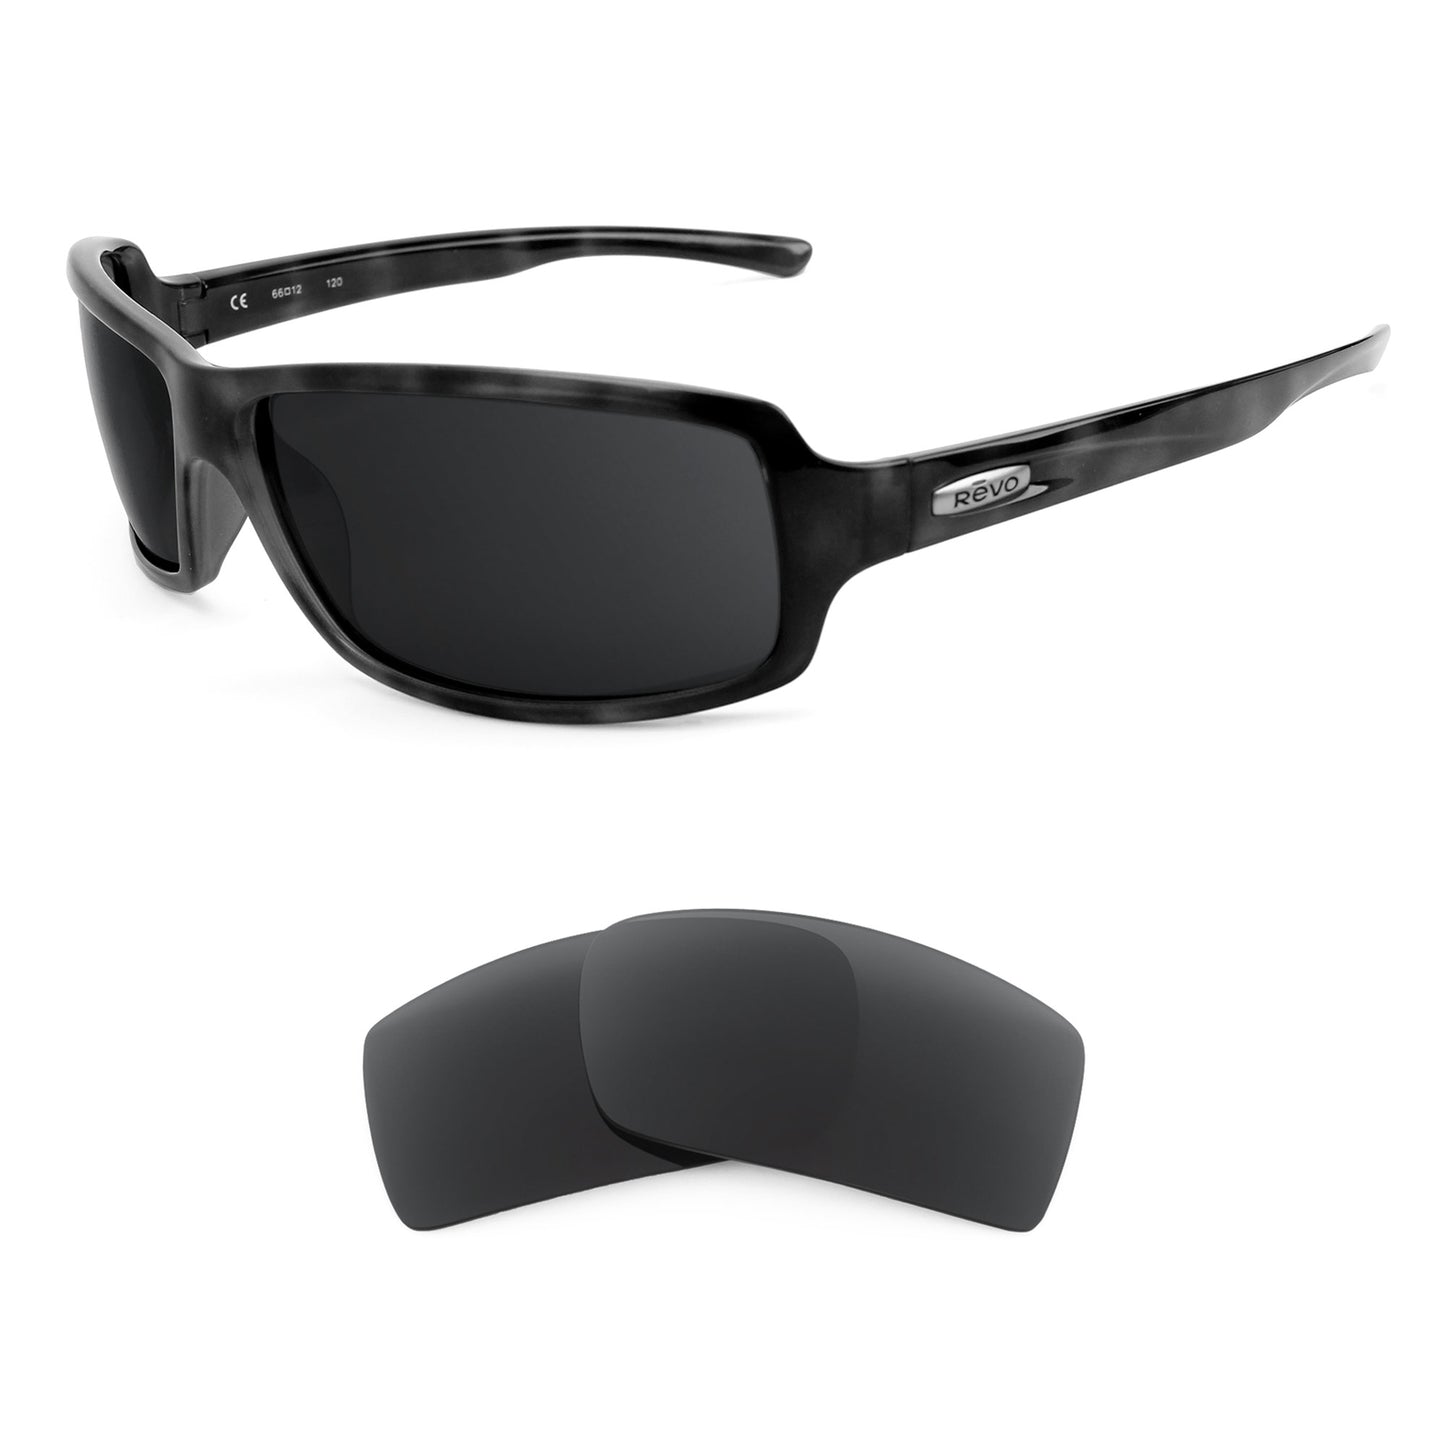 Revo Spool RE4048 sunglasses with replacement lenses